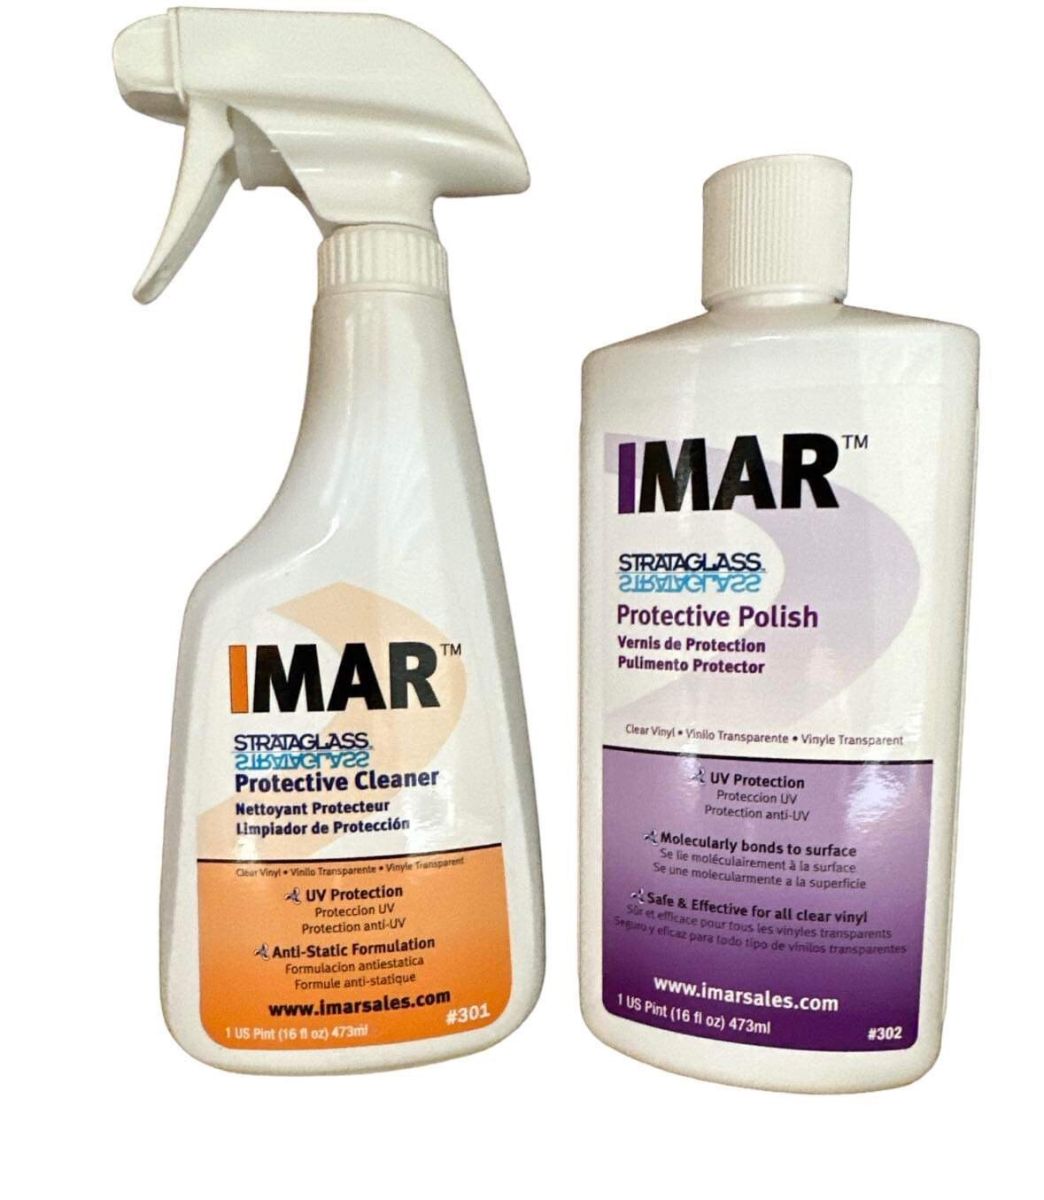 IMAR™ Strataglass Clear Vinyl Protective Cleaner